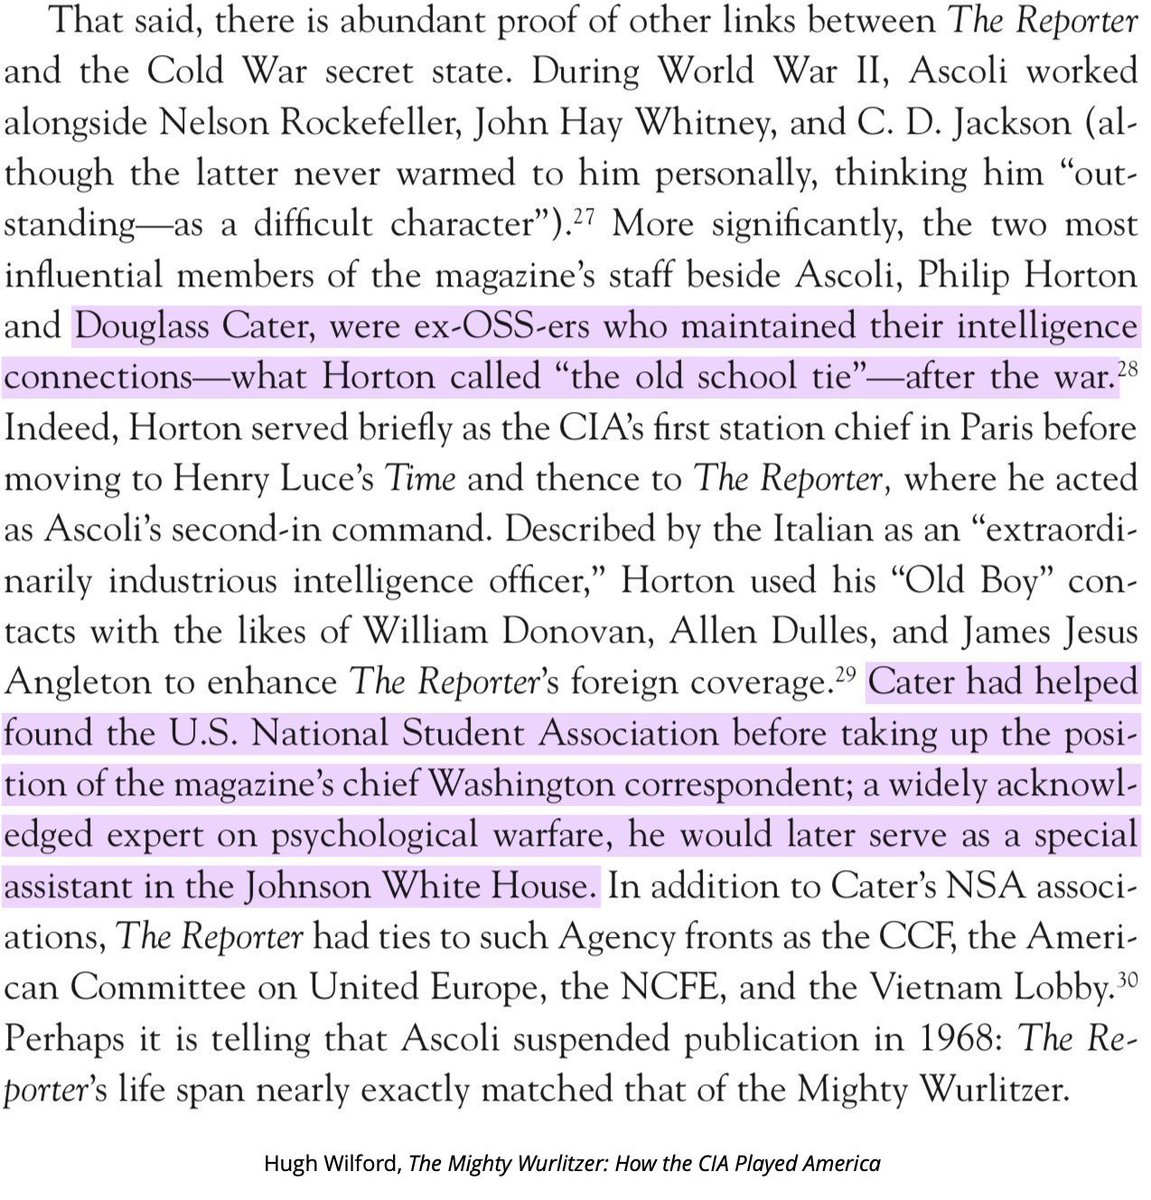 Cater had co-founded CIA fronts, National Student Ass'n (with which Klein's NY Mag colleagues, Clay Felker and Gloria Steinem had worked) and Harvard Int. Activities Committee, and spent 14 years at CIA magazine, The Reporter. 9/ https://twitter.com/paulkleinfancam/status/1276634744155930624